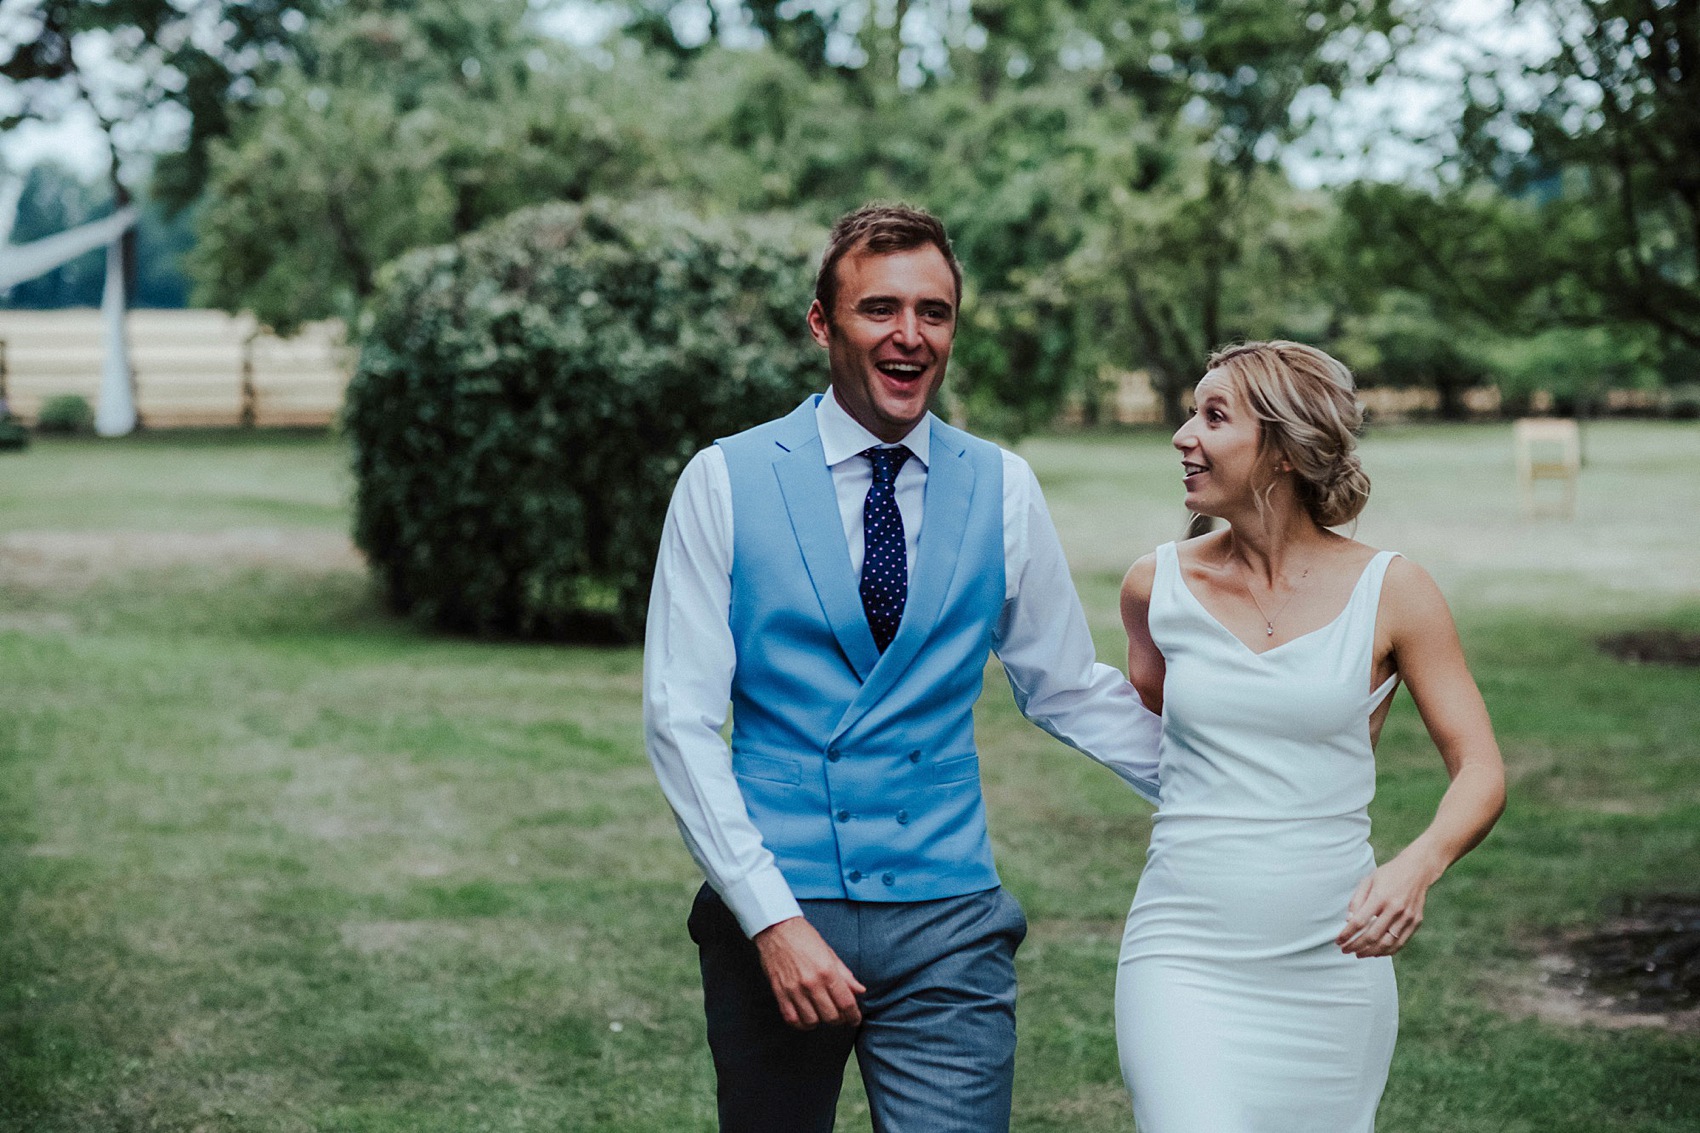 Modern backless wedding dress  - A Modern Backless Dress for a Homegrown + English Country Garden Wedding at the Family Home